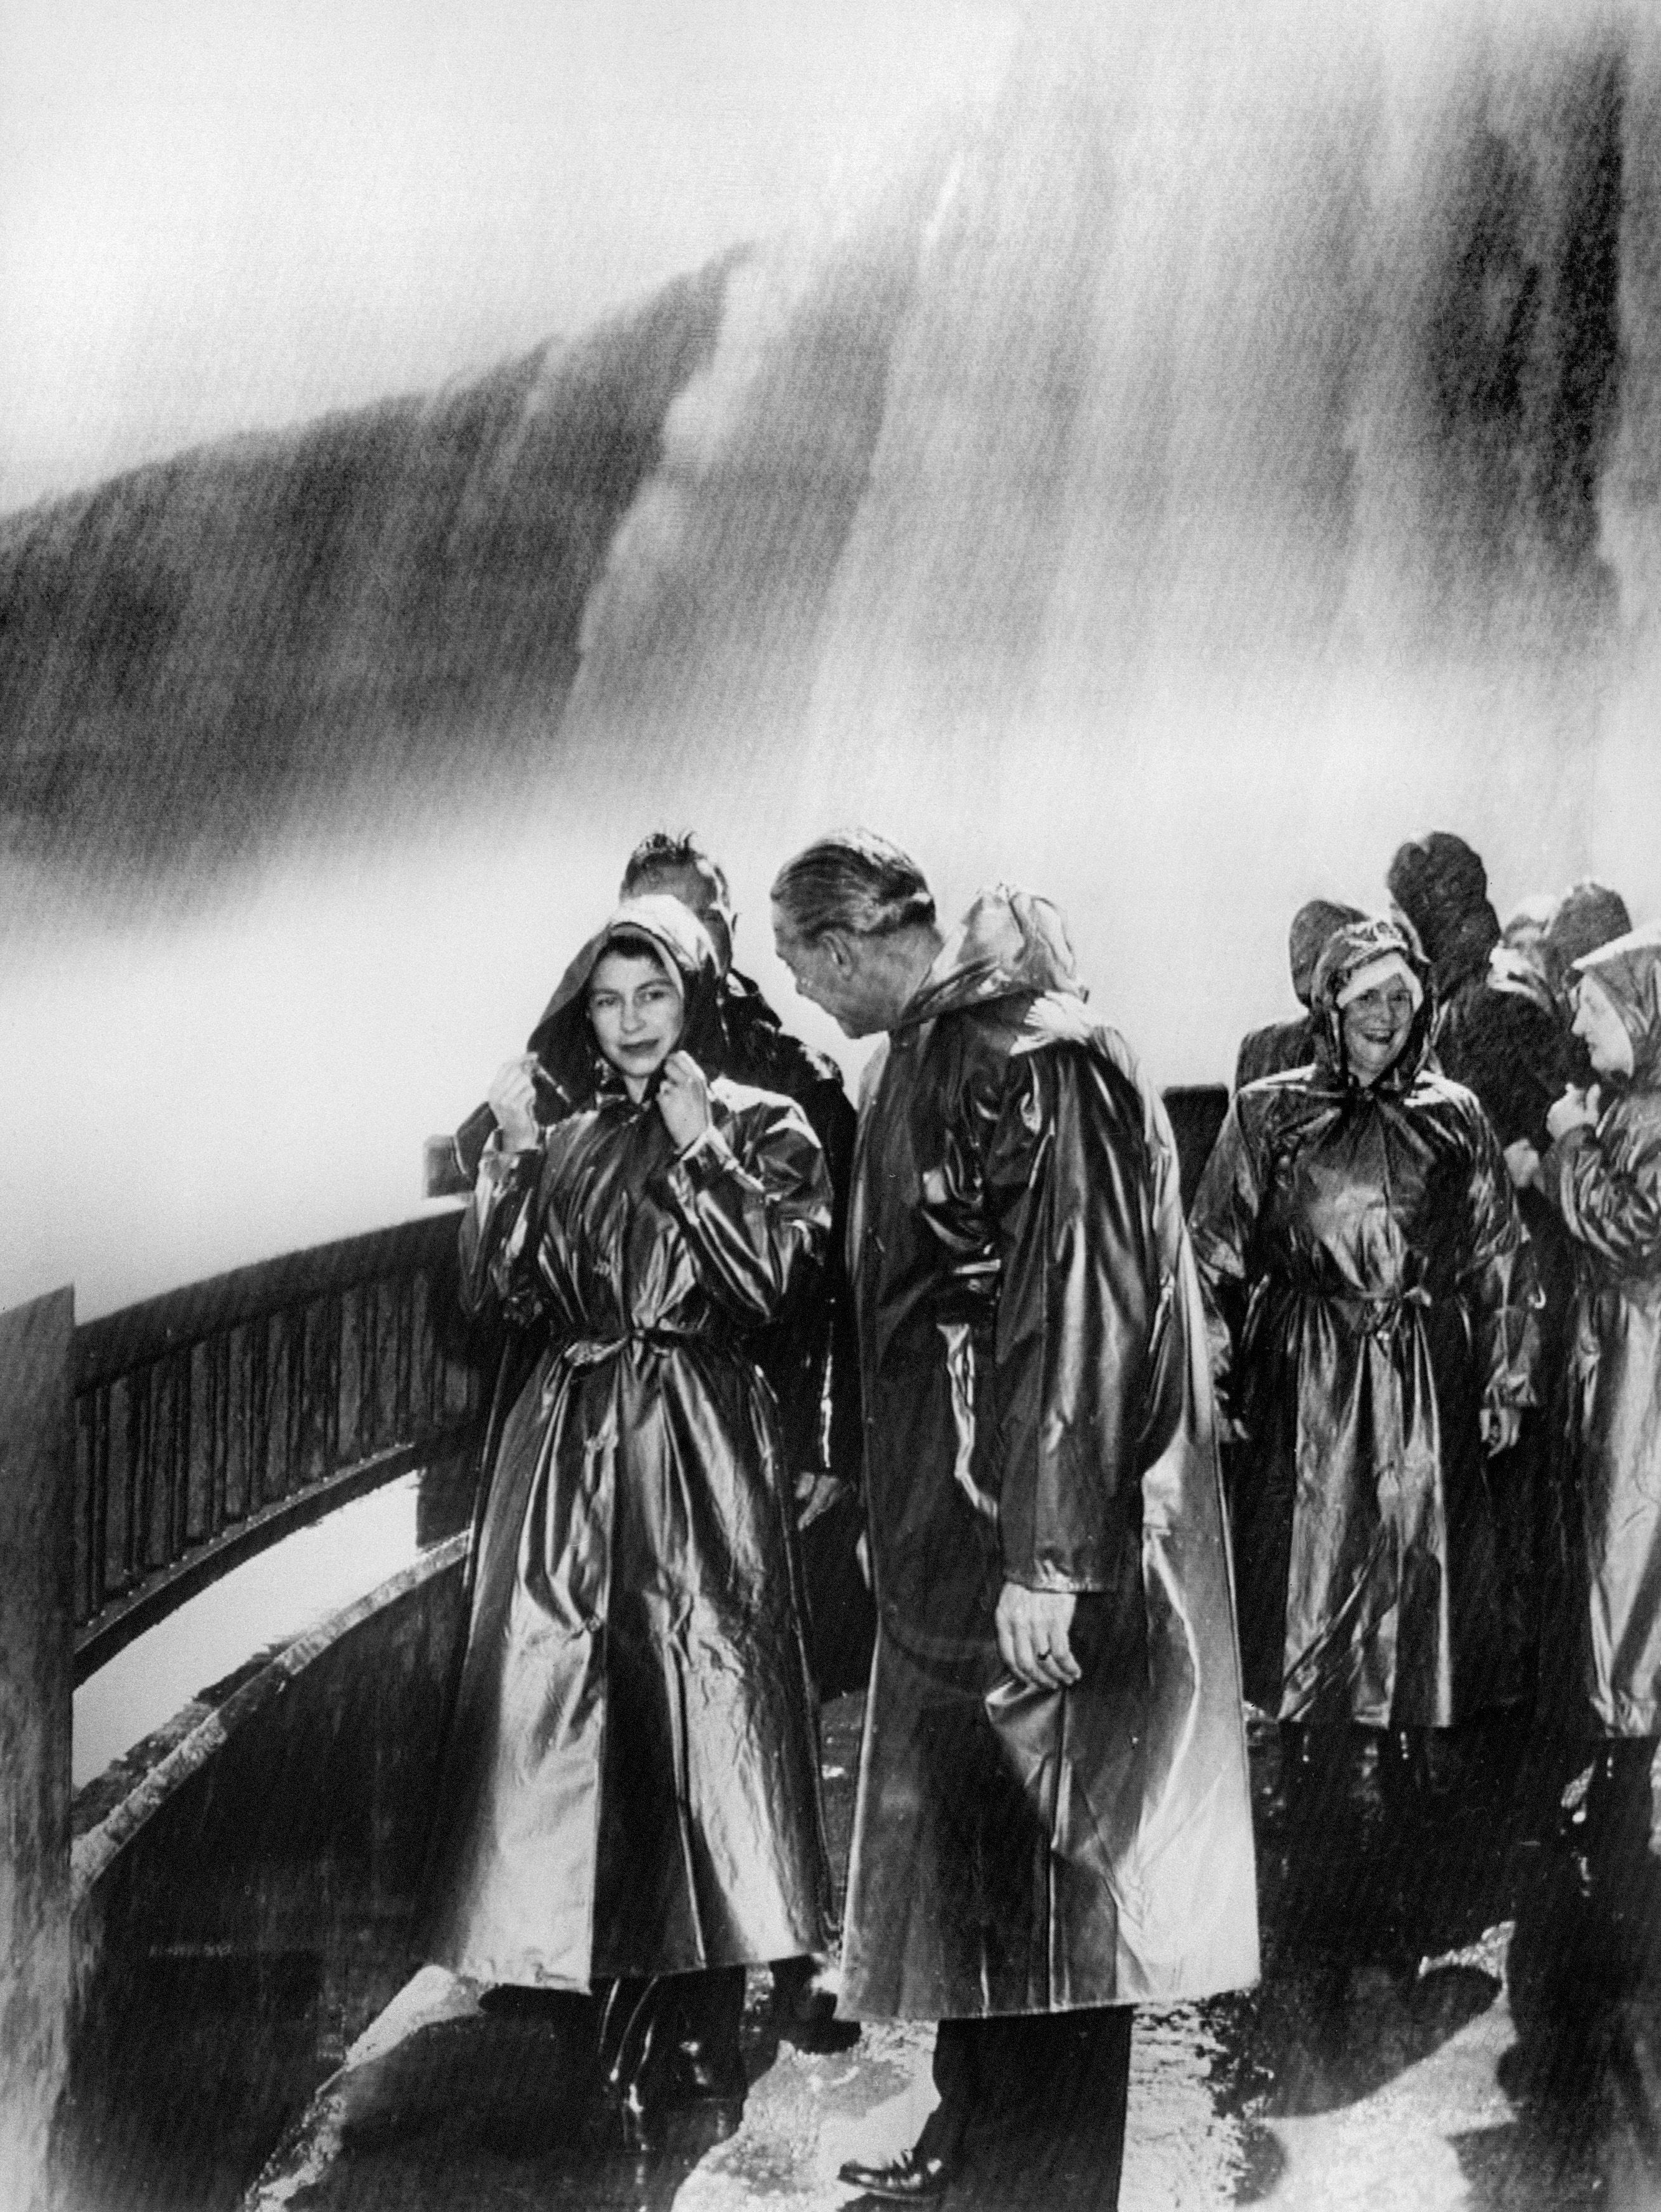 Then Princess Elizabeth at Niagara Falls with her husband (right) in 1951.